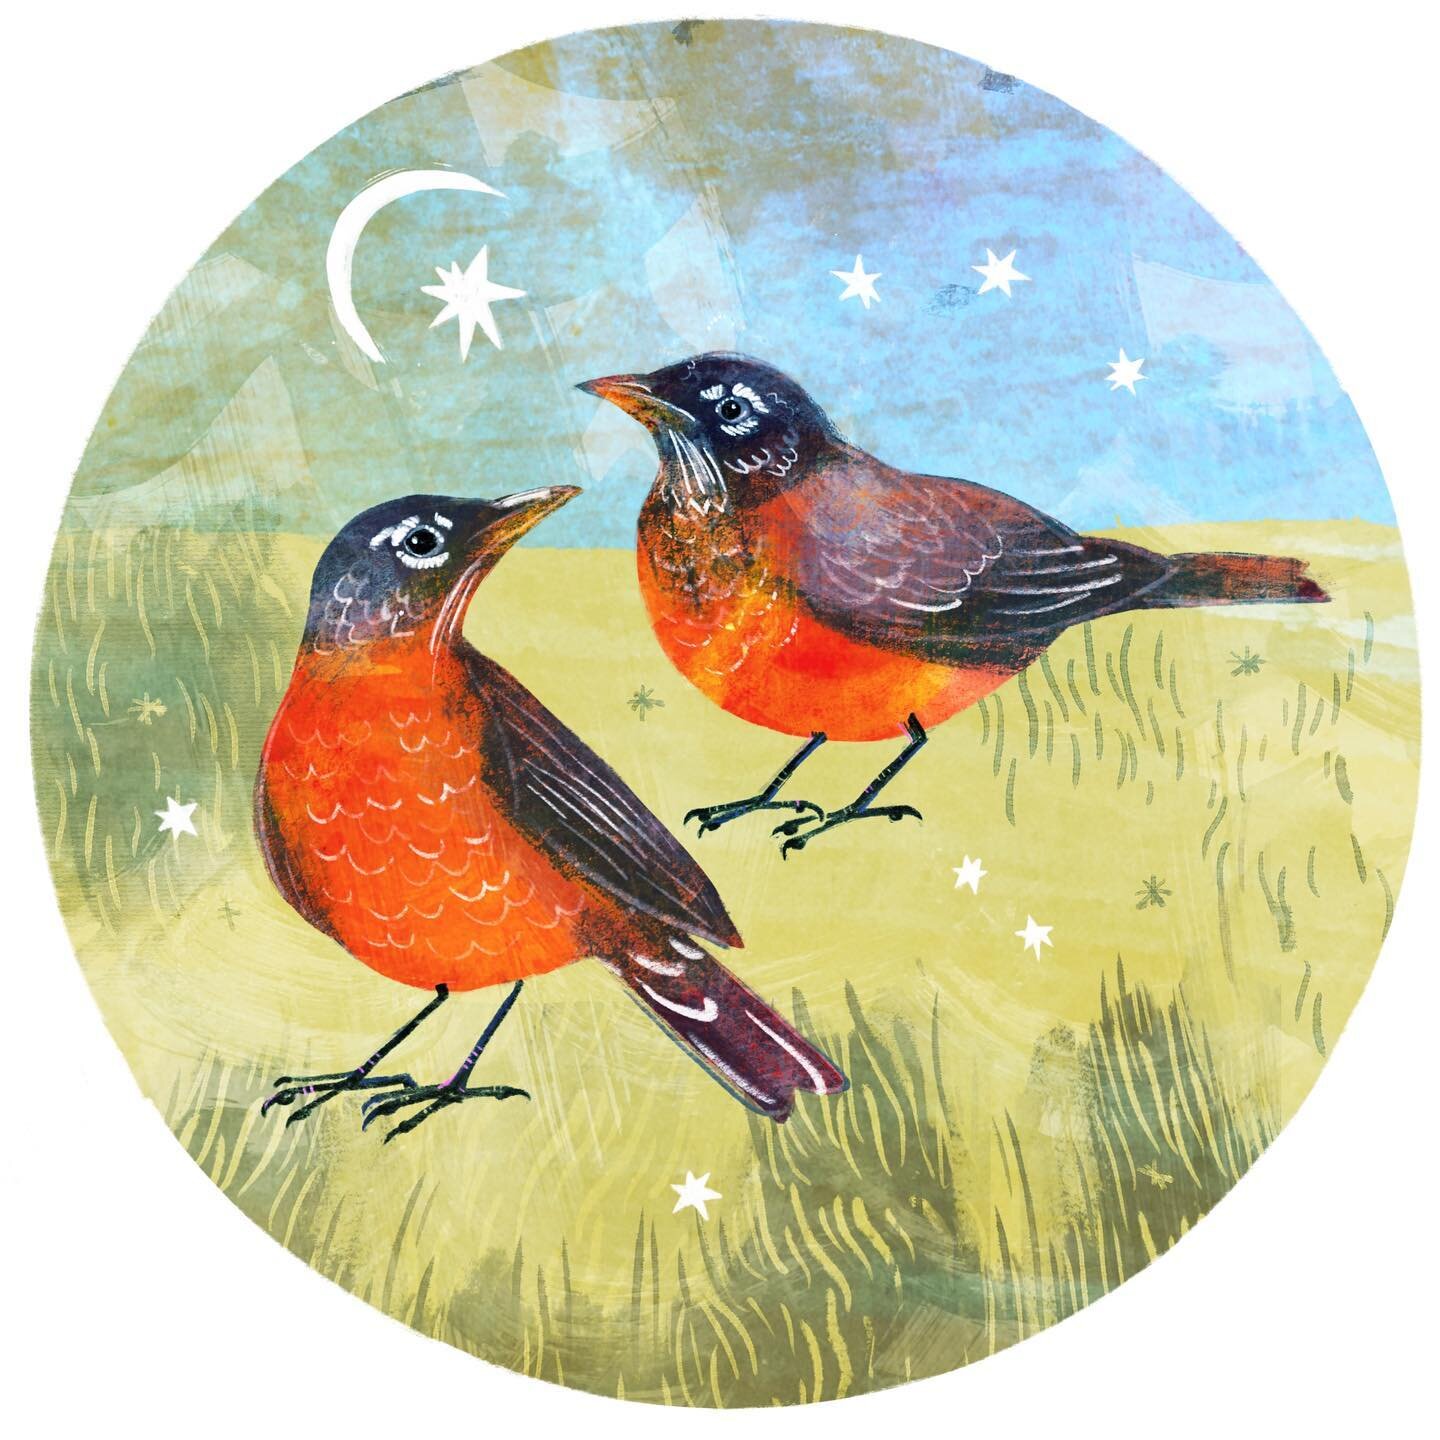 Winter seems to have returned to New England for now, but I&rsquo;ve spotted groups of robins foraging in the grass where the snow has melted. I haven&rsquo;t heard their spring songs yet, though&hellip; 🎶🎵👂 

#wildlifeart #americanrobin #animalil